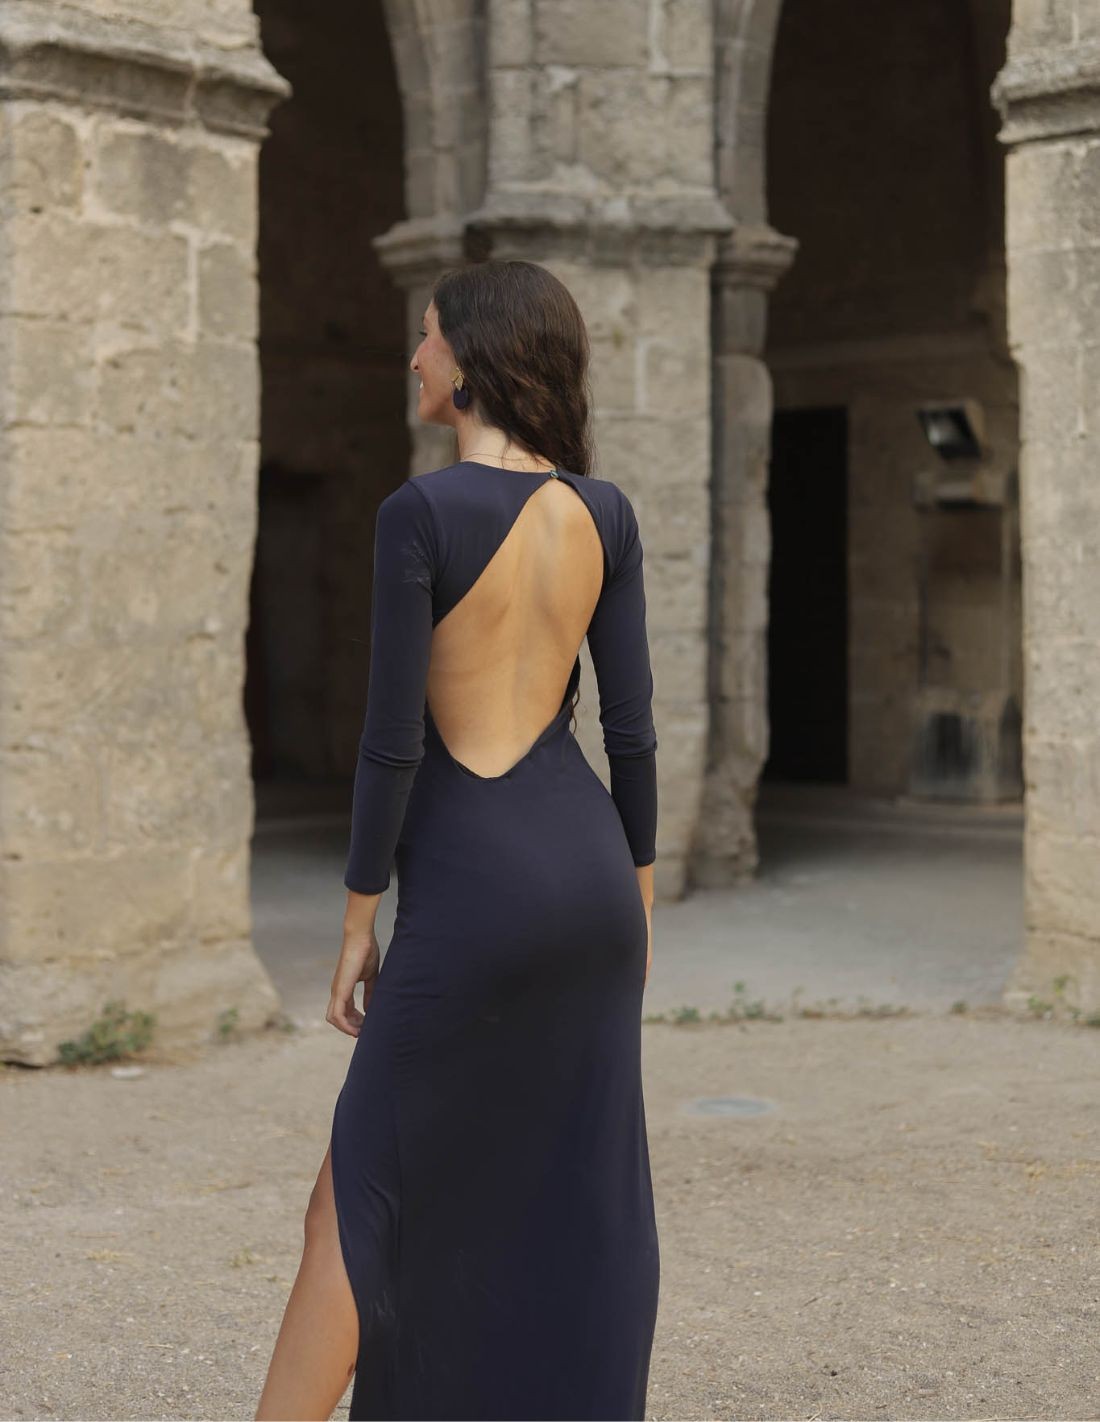 https://invitadisima.com/33521-thickbox_default/long-party-dress-with-open-back-and-side-slit-bombon-spain.jpg